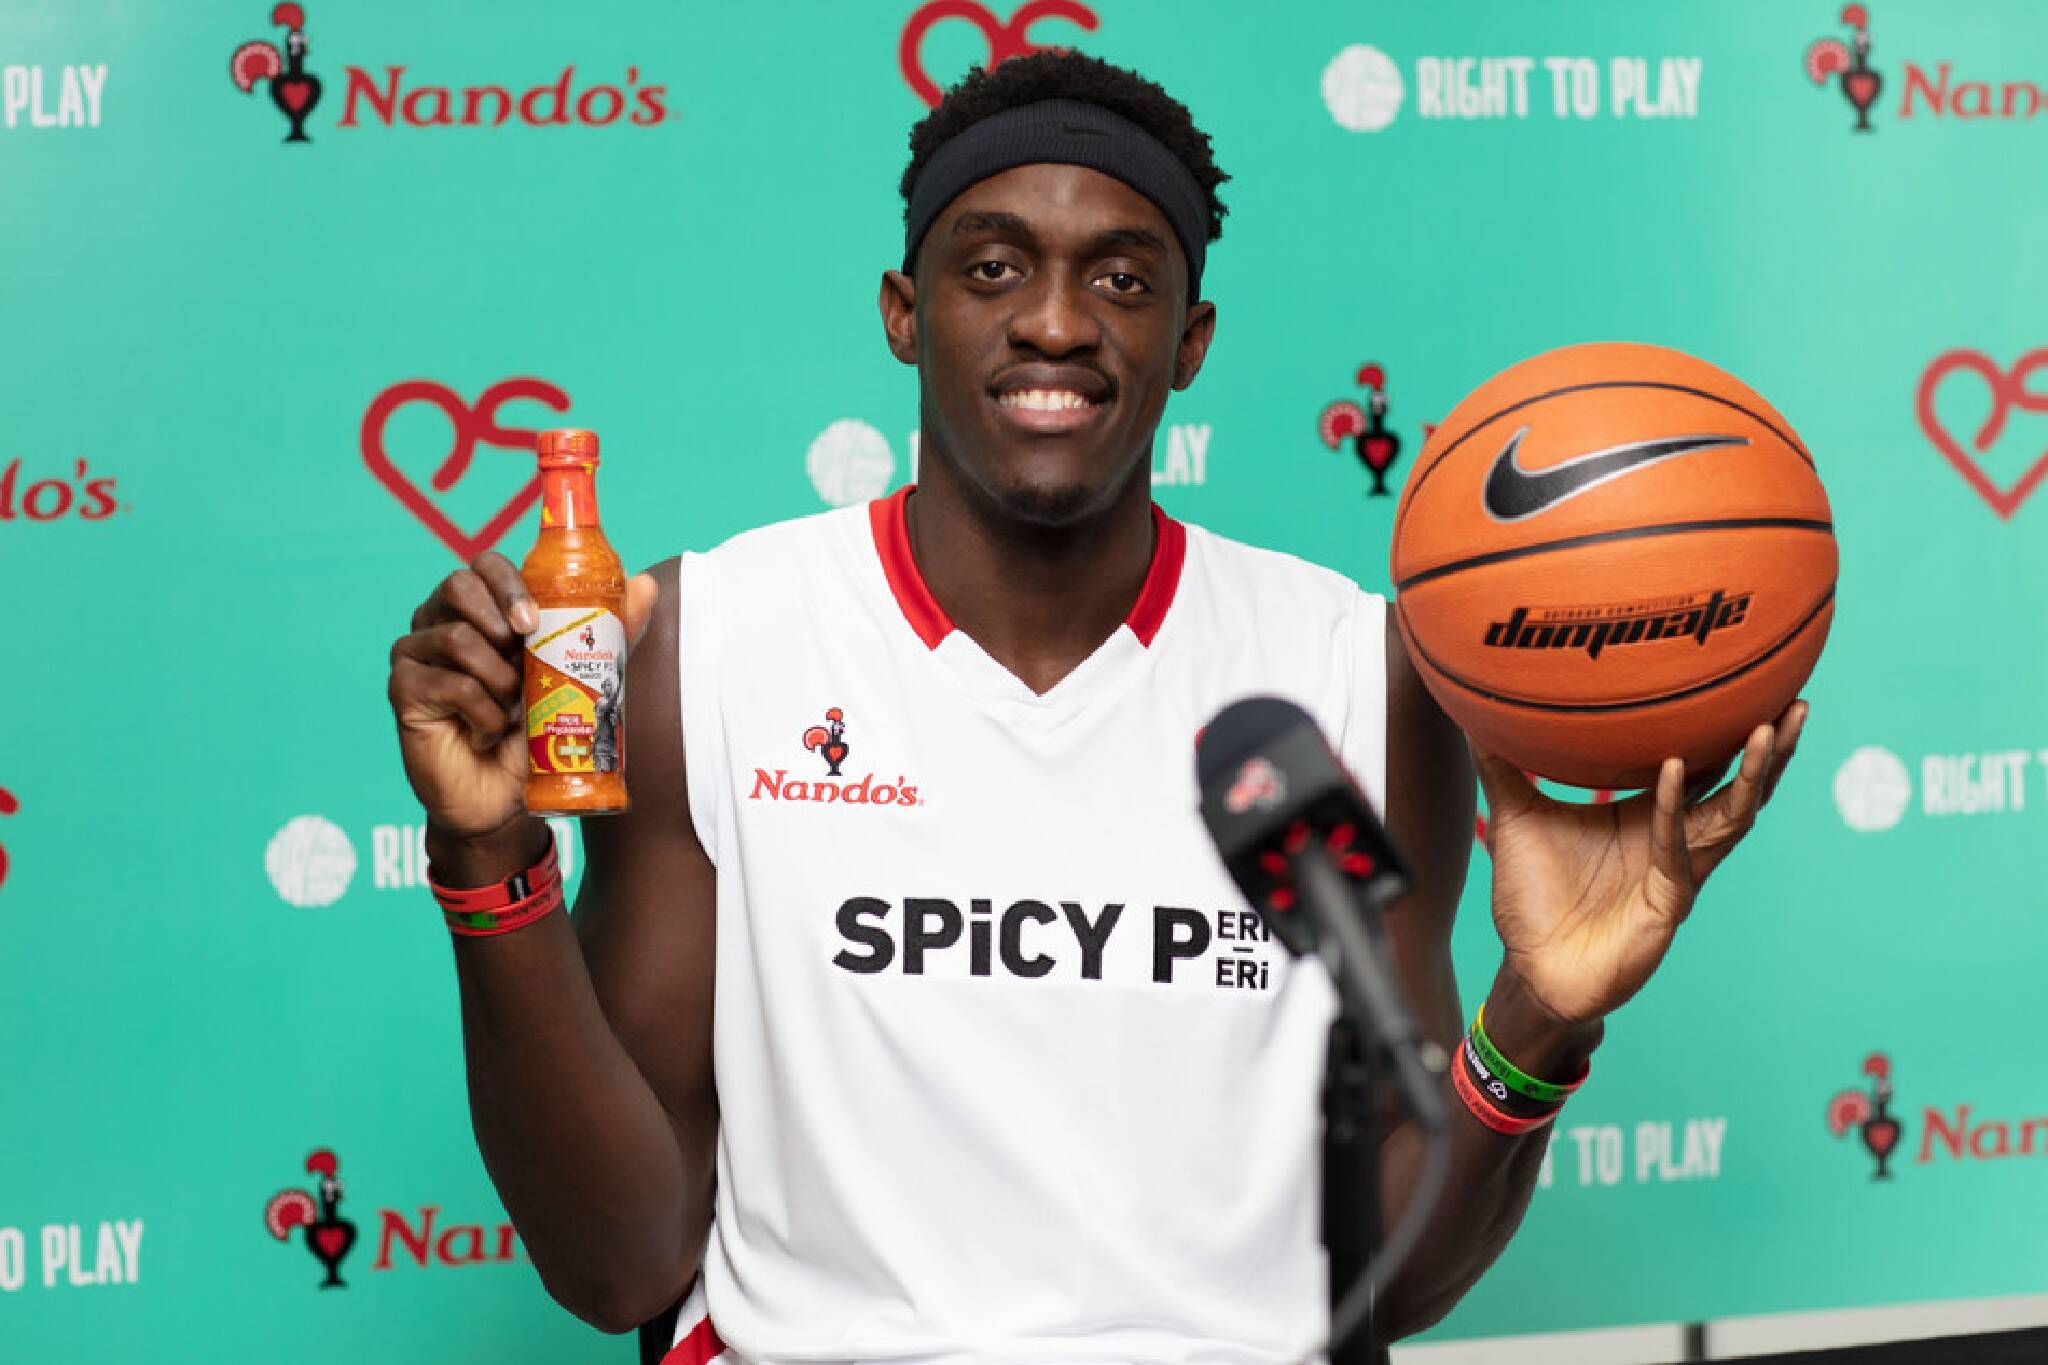 Pascal Siakam of the Raptors now has his own hot sauce